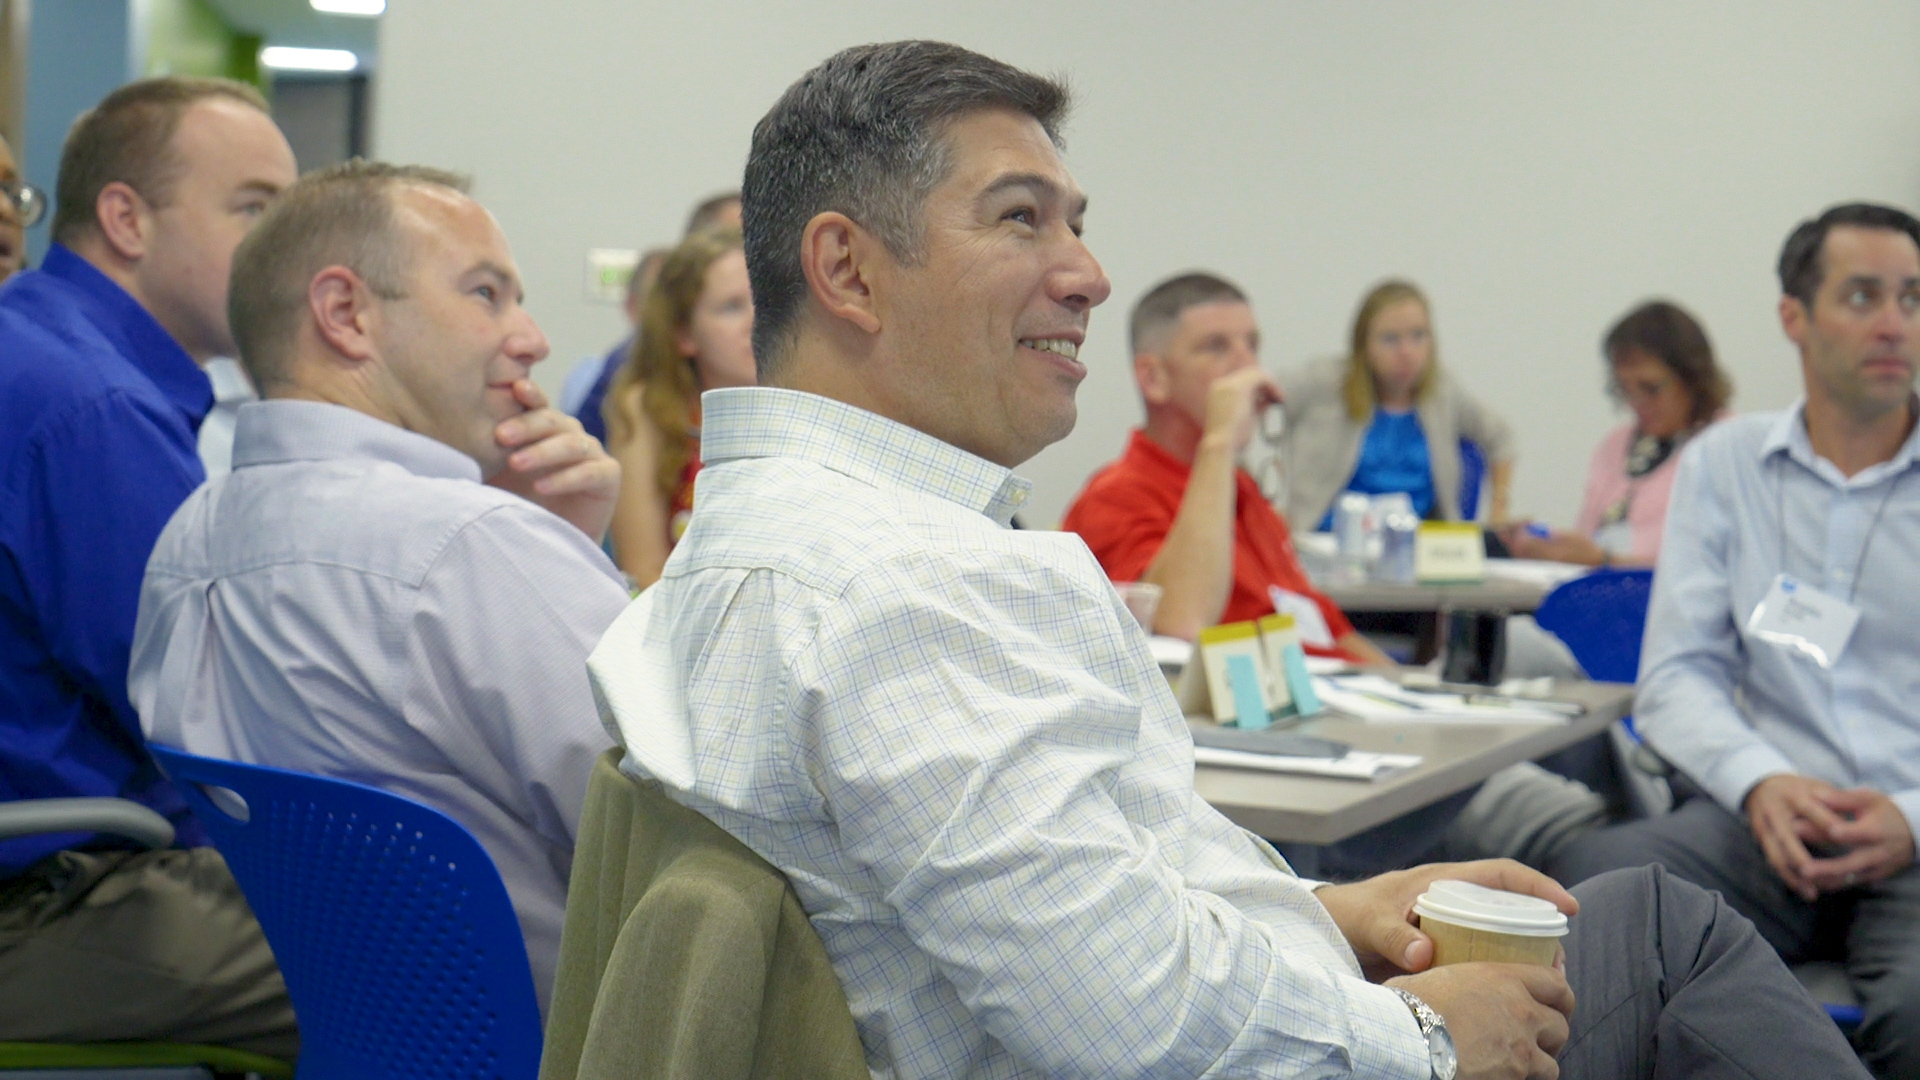 ${ Man in professional development course smiles, looking off to the side }